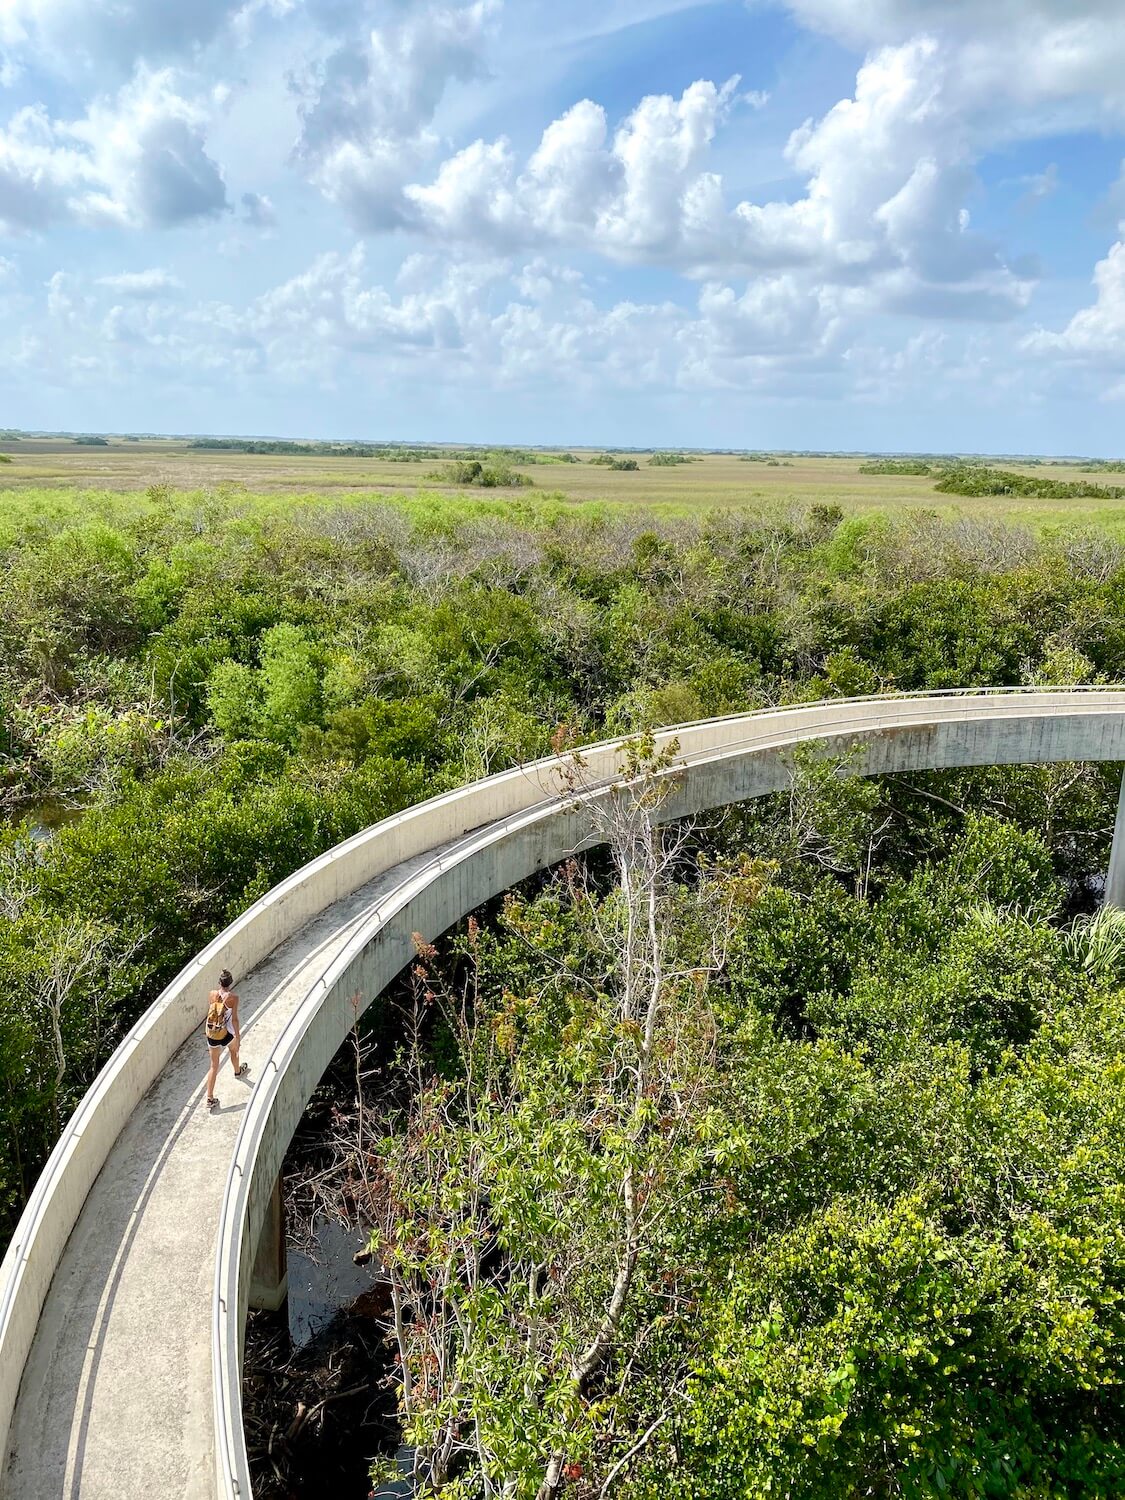 A woman walks up a curved ramp to the observation tower at Shark Valley in the Everglades.  The green jungle like trees open up to a wide view of marshland.